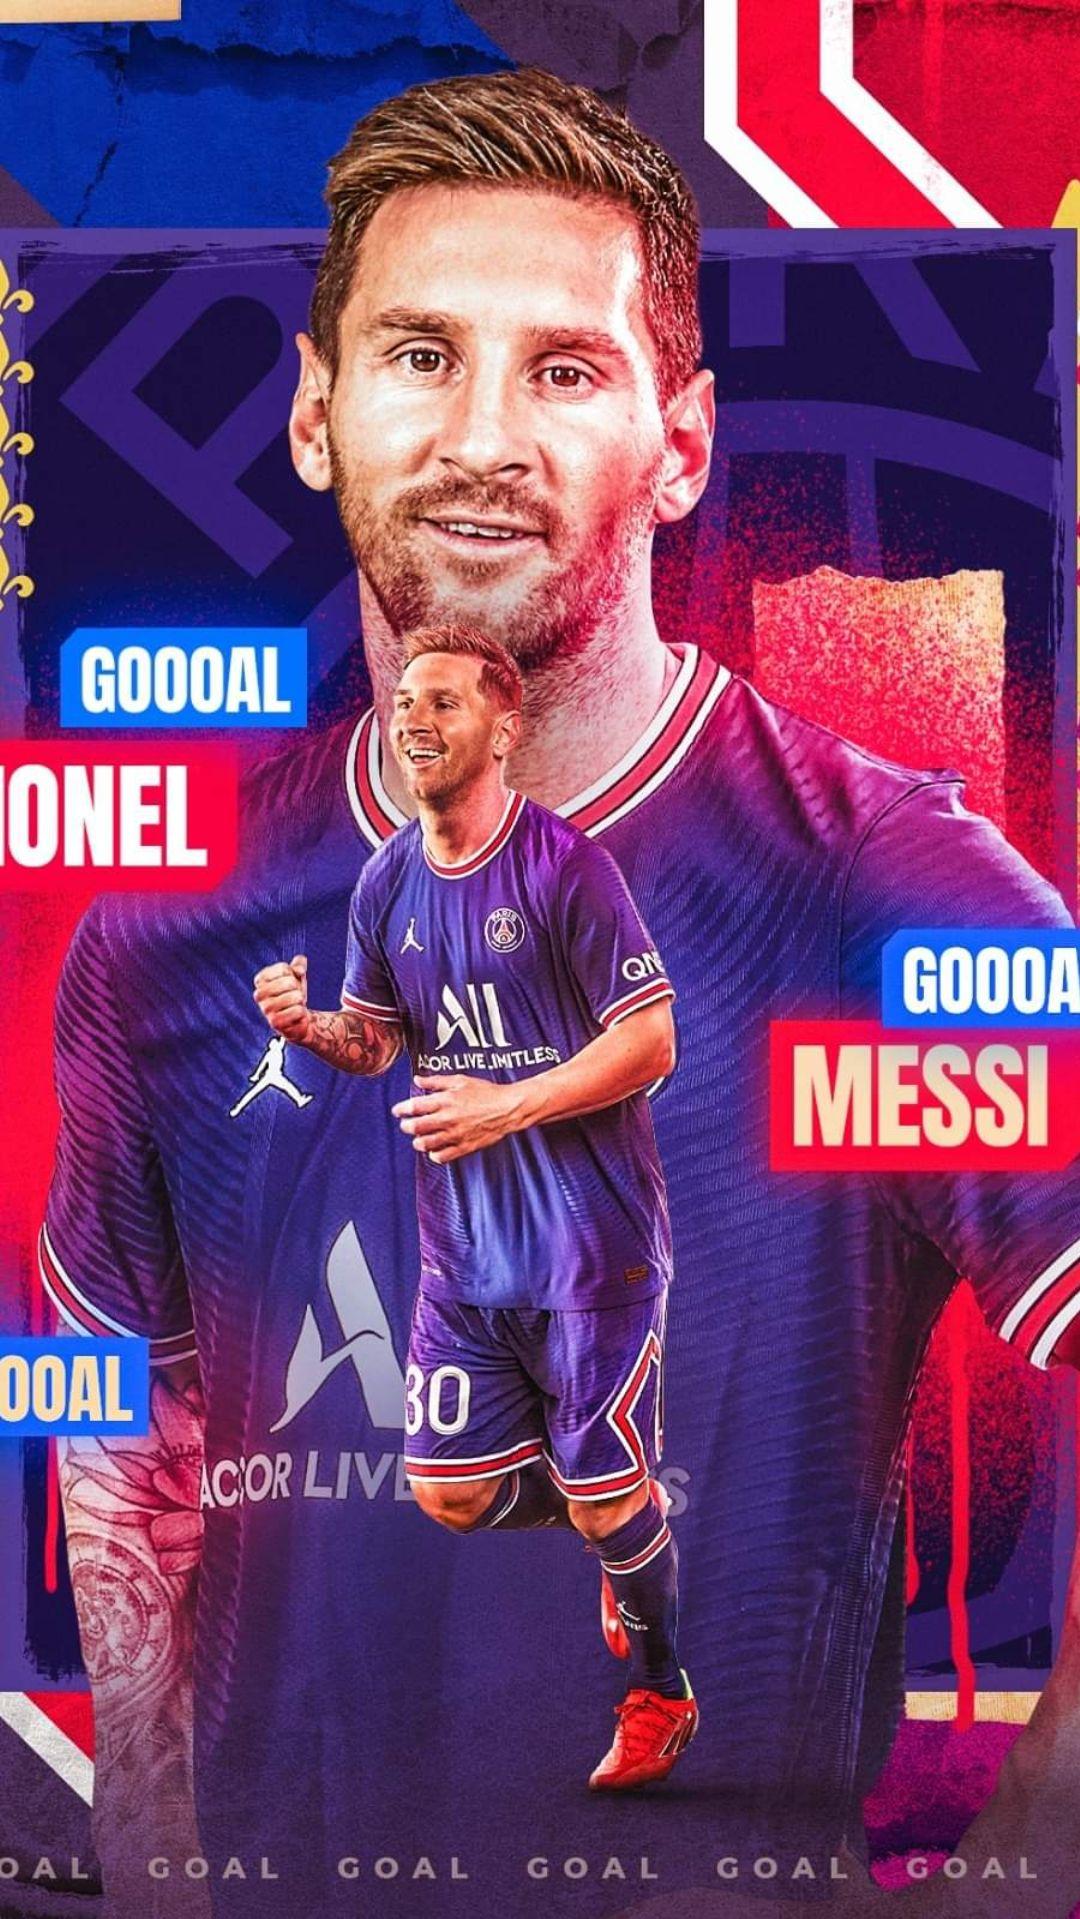 Lionel Messi PSG Wallpapers   Top 35 Best Lionel Messi PSG Backgrounds